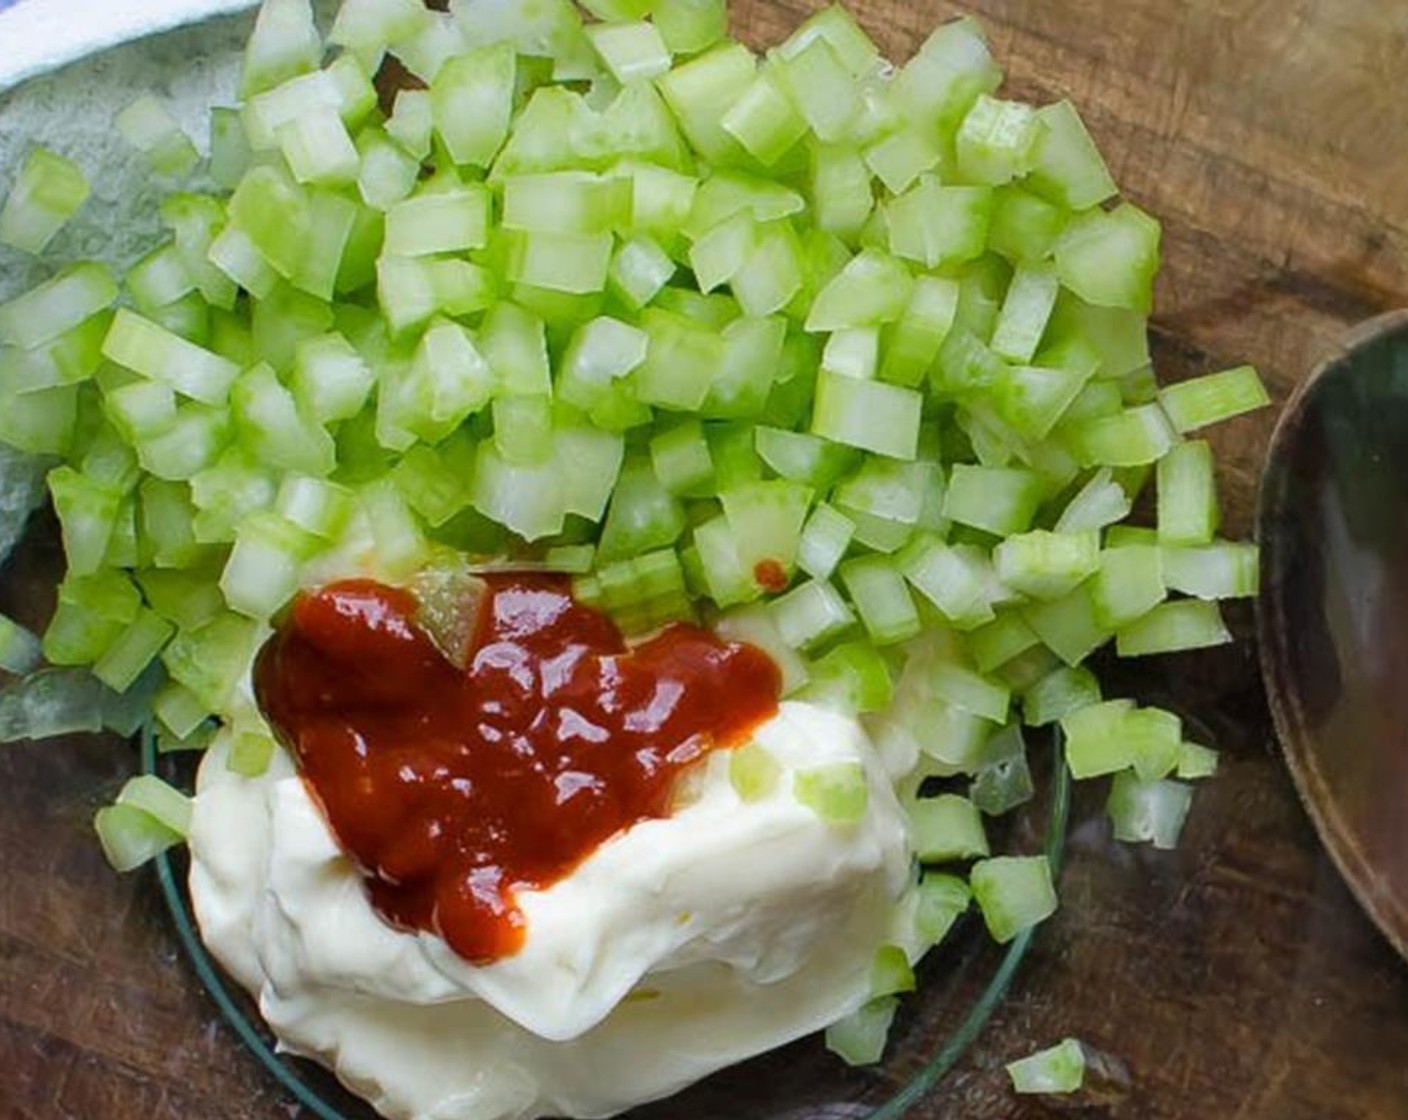 step 4 Dice the Celery (1 stalk). In a large bowl, combine the Mayonnaise (1/2 cup), celery, Sriracha (1/2 Tbsp), zest and juice from Lime (1/3), Kosher Salt (1/4 tsp), Fresh Cilantro (2 Tbsp) and Freshly Ground Black Pepper (to taste).